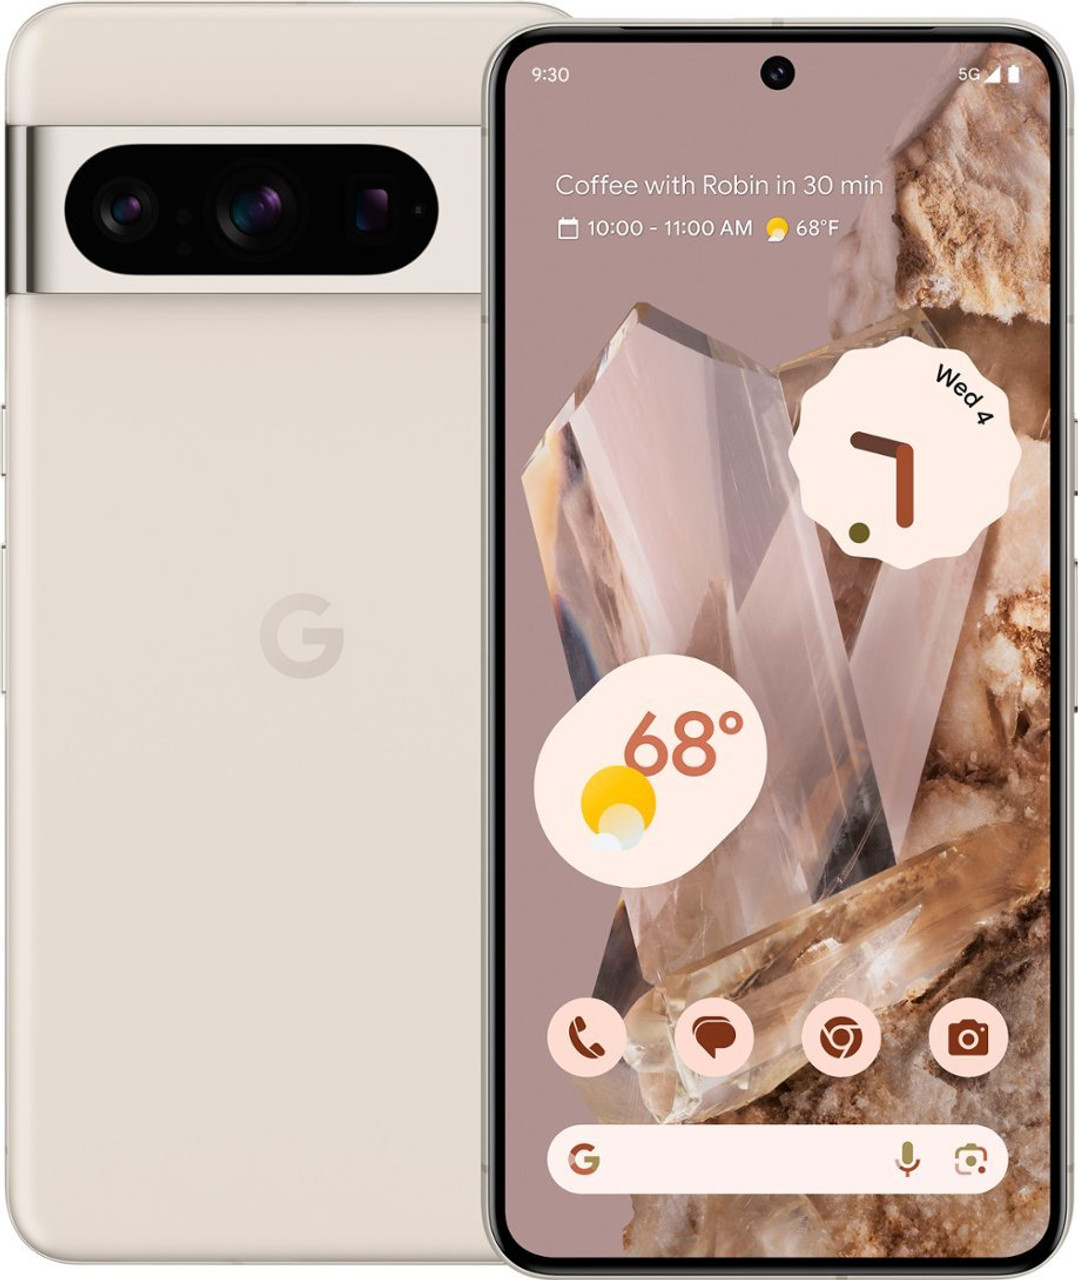 Google Pixel 8 Pro 5G (New) – Factory Mobile Mall